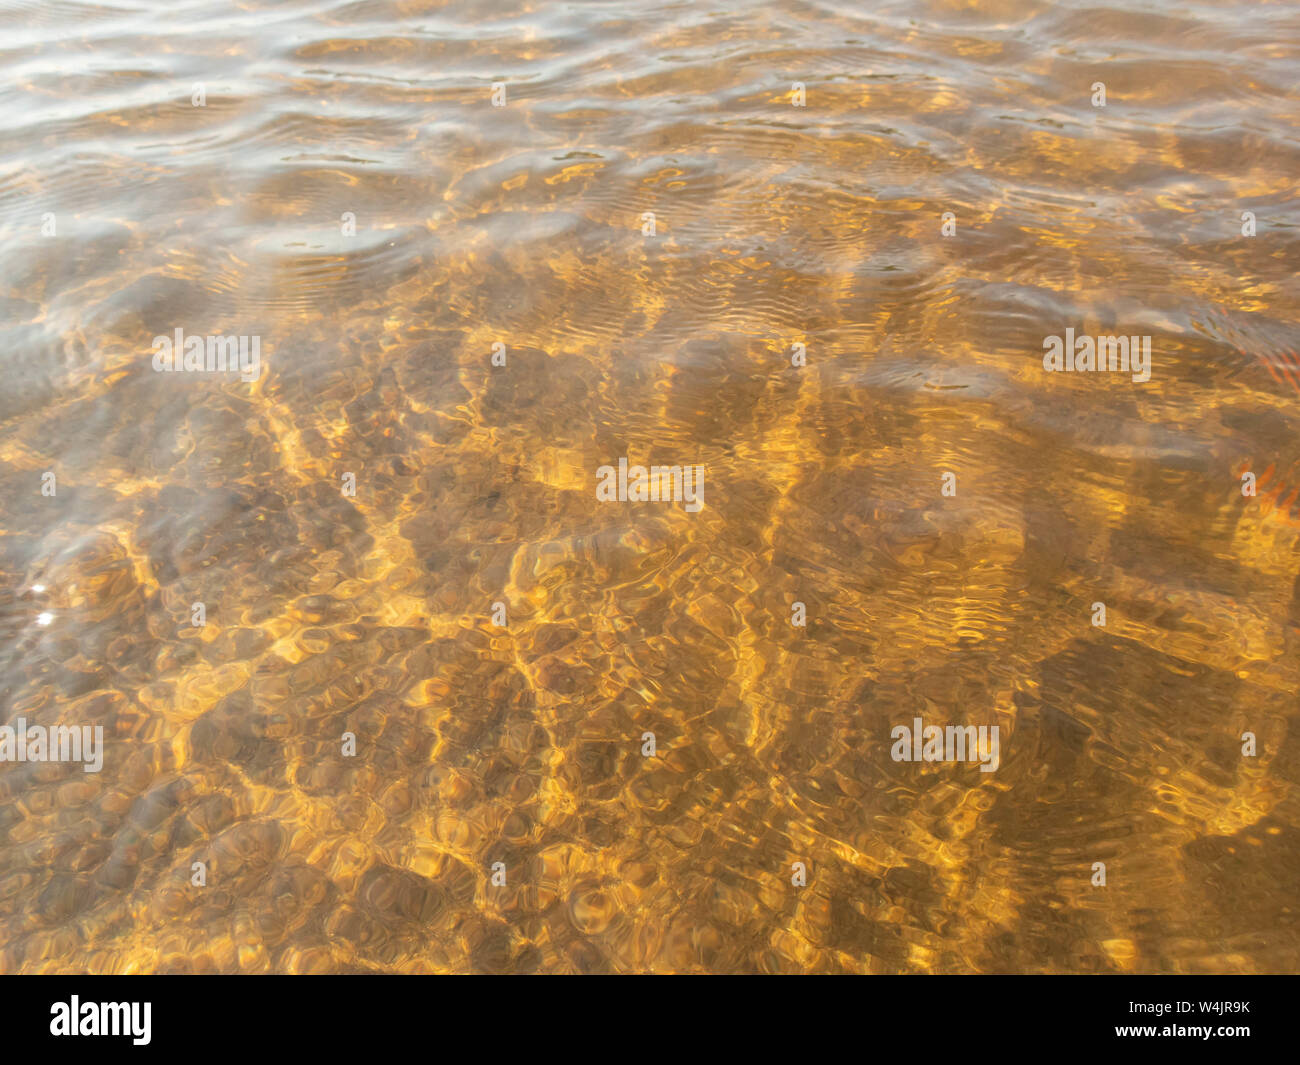 seabed visible in the bay, Bothnian Bay, Finland Stock Photo